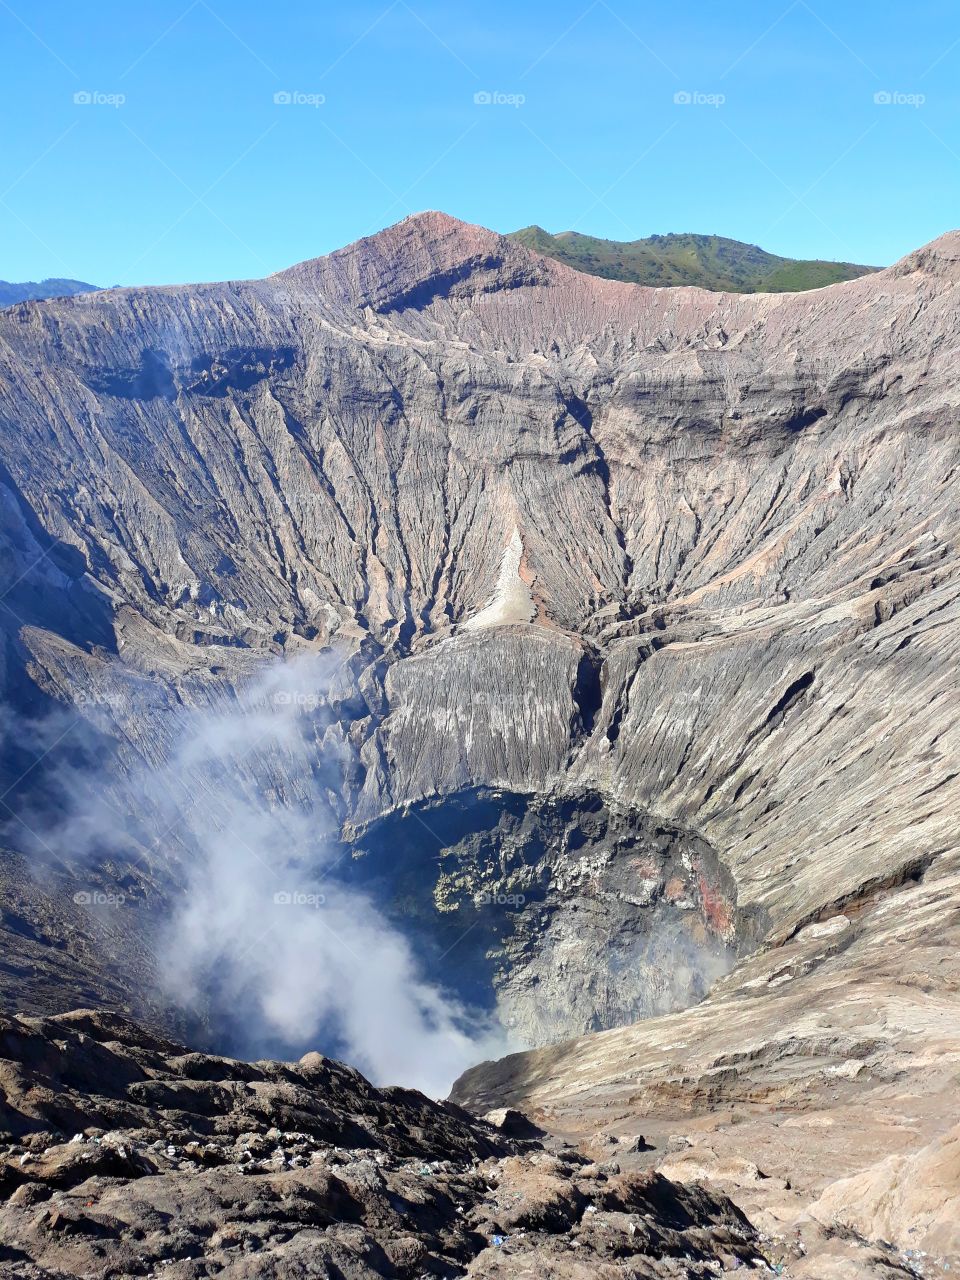 The Bromo's Crater